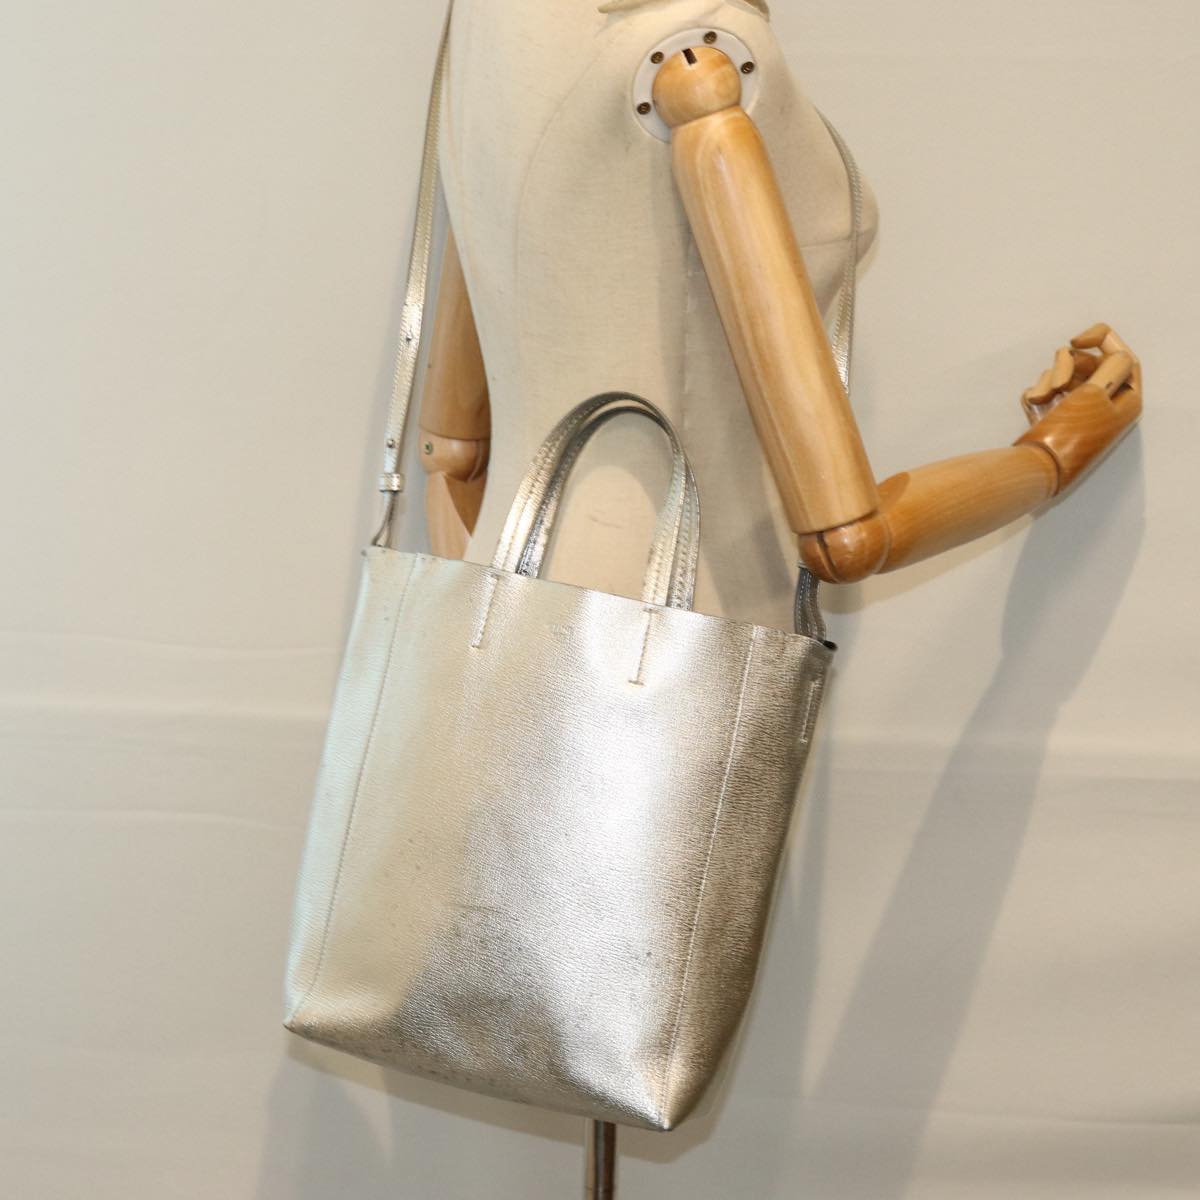 CELINE Hand Bag Leather 2way Silver Auth 74224